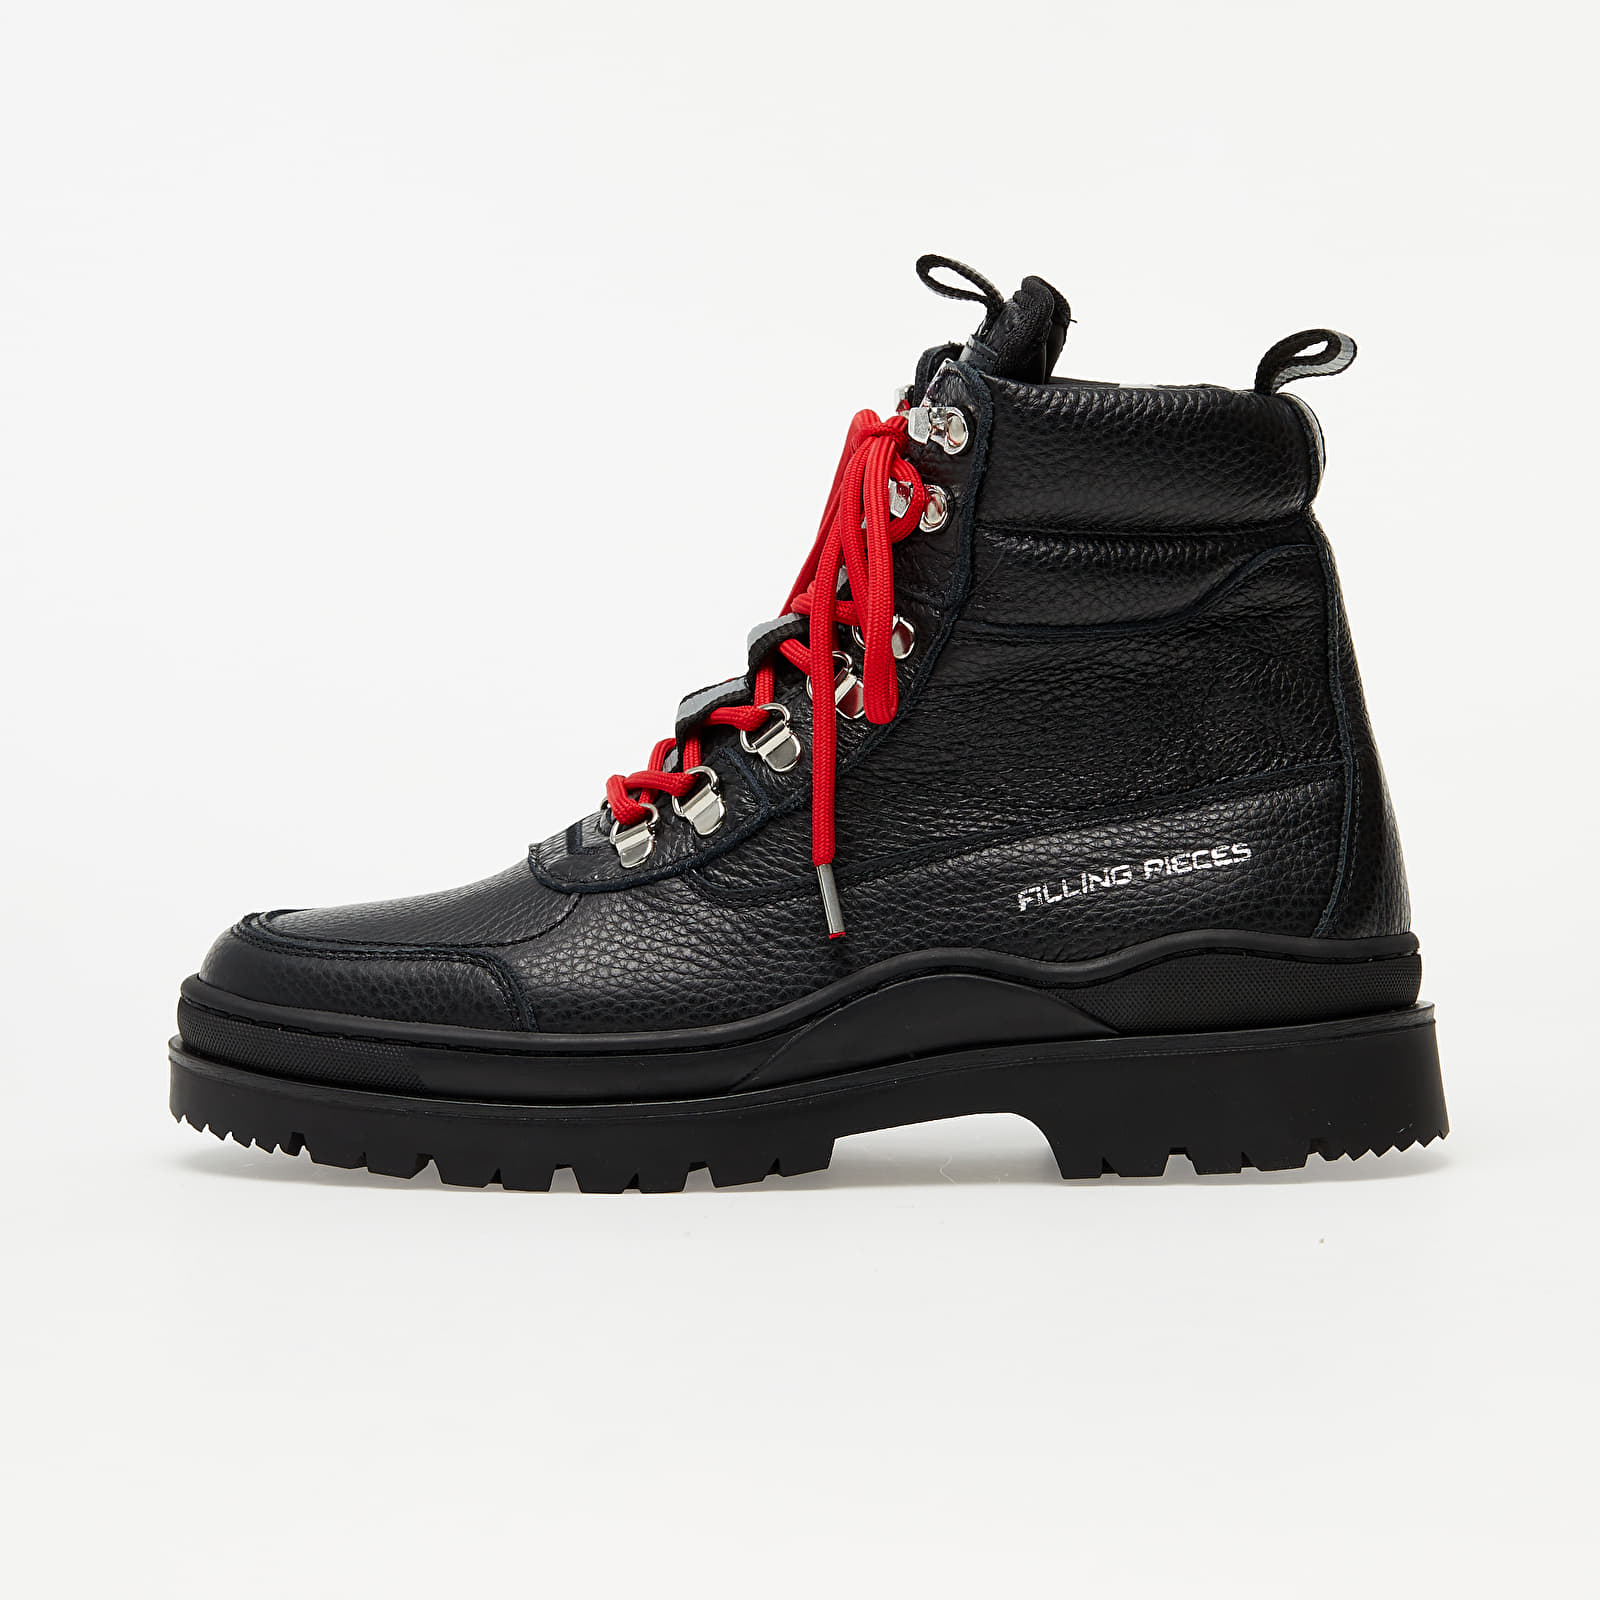 Filling Pieces Mountain Boot Rock Black 633283918610